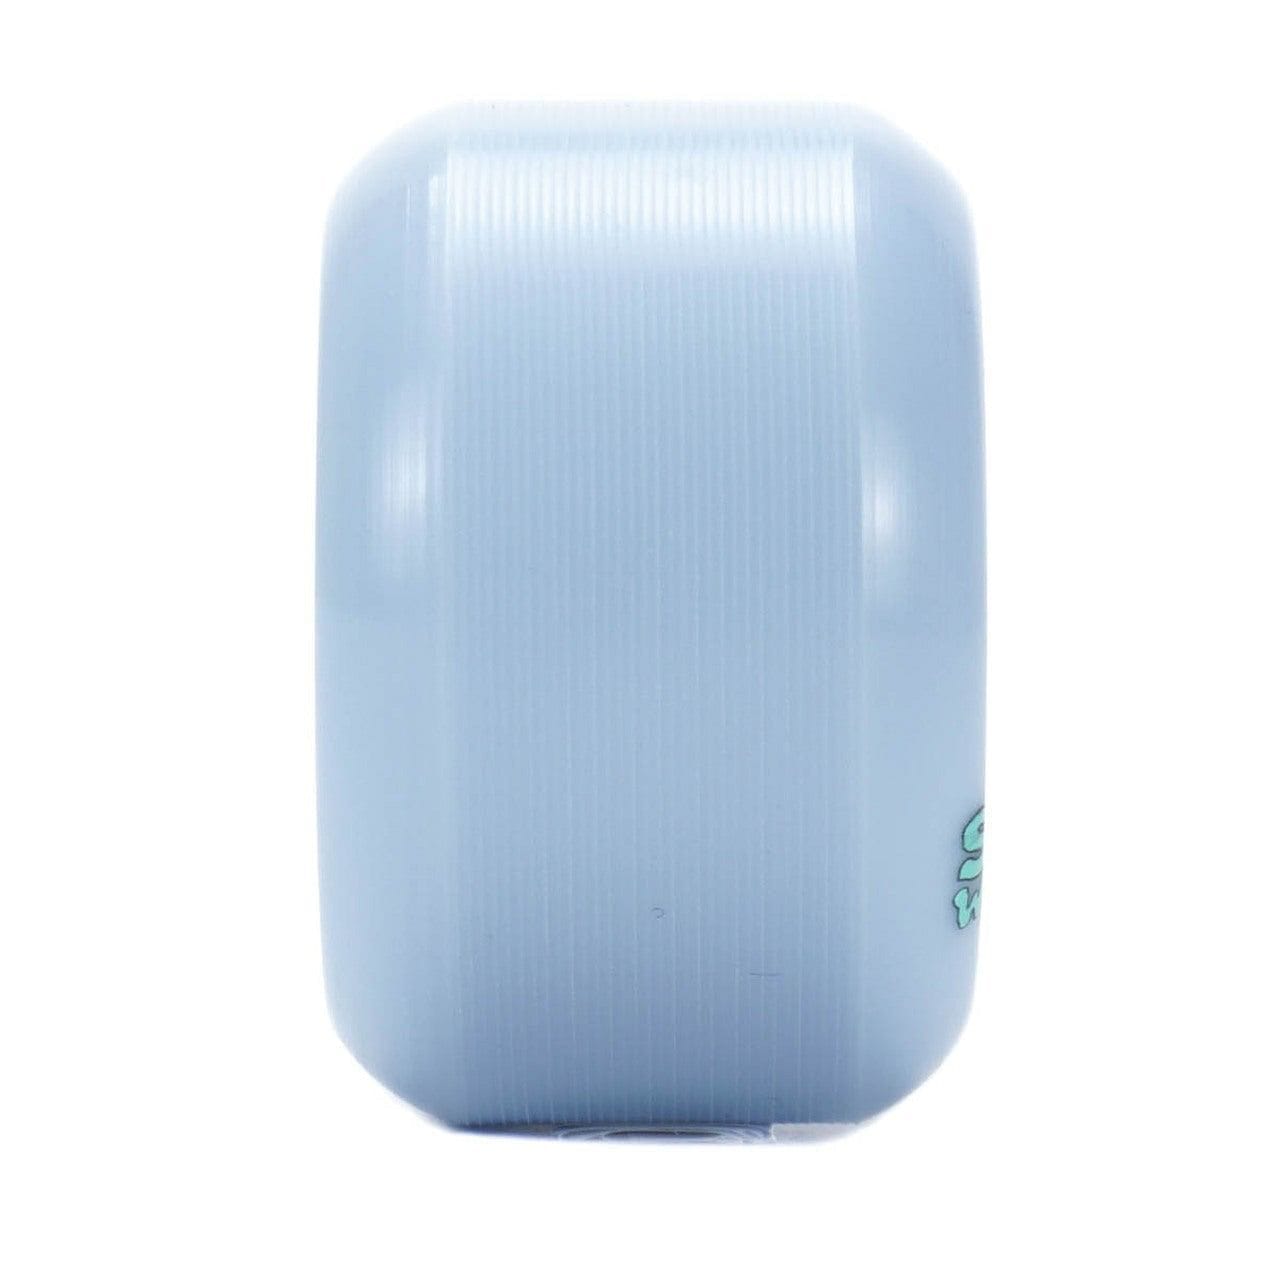 Snot | 53mm Ice Blue - Conical Shape